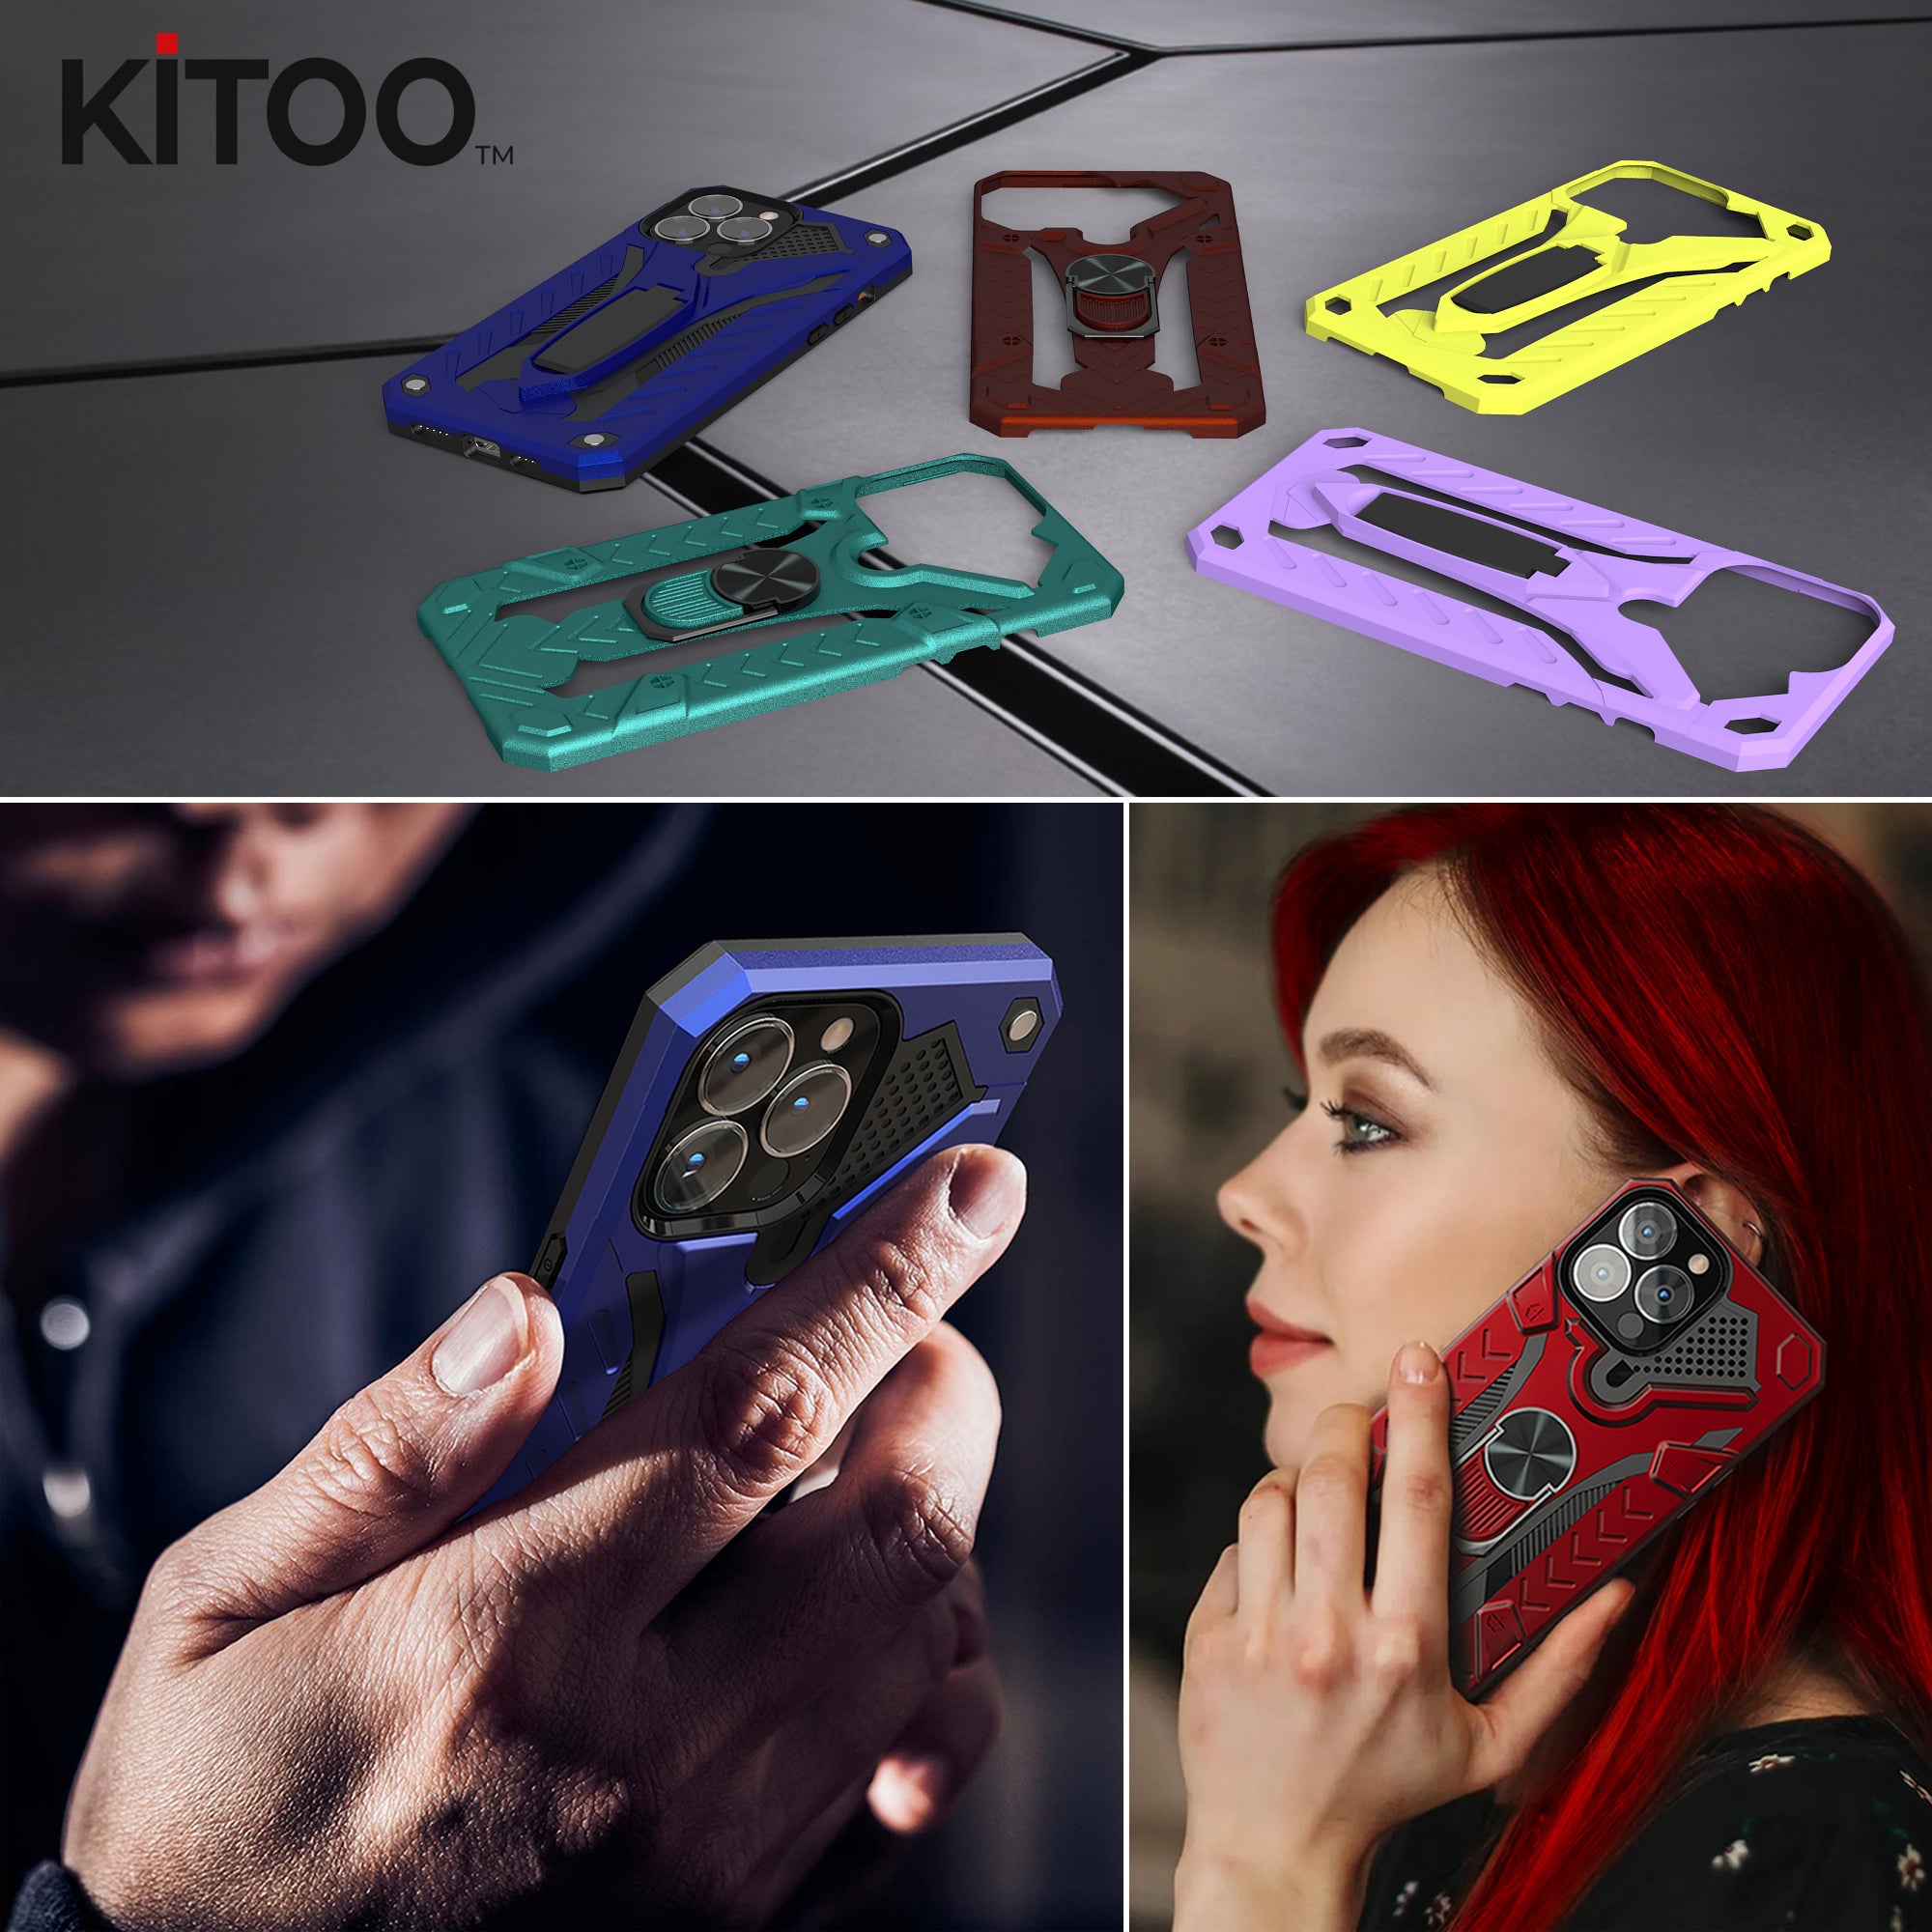 Kitoo Kickstand Panel Designed for iPhone 13 case (Spare Part only) - Black